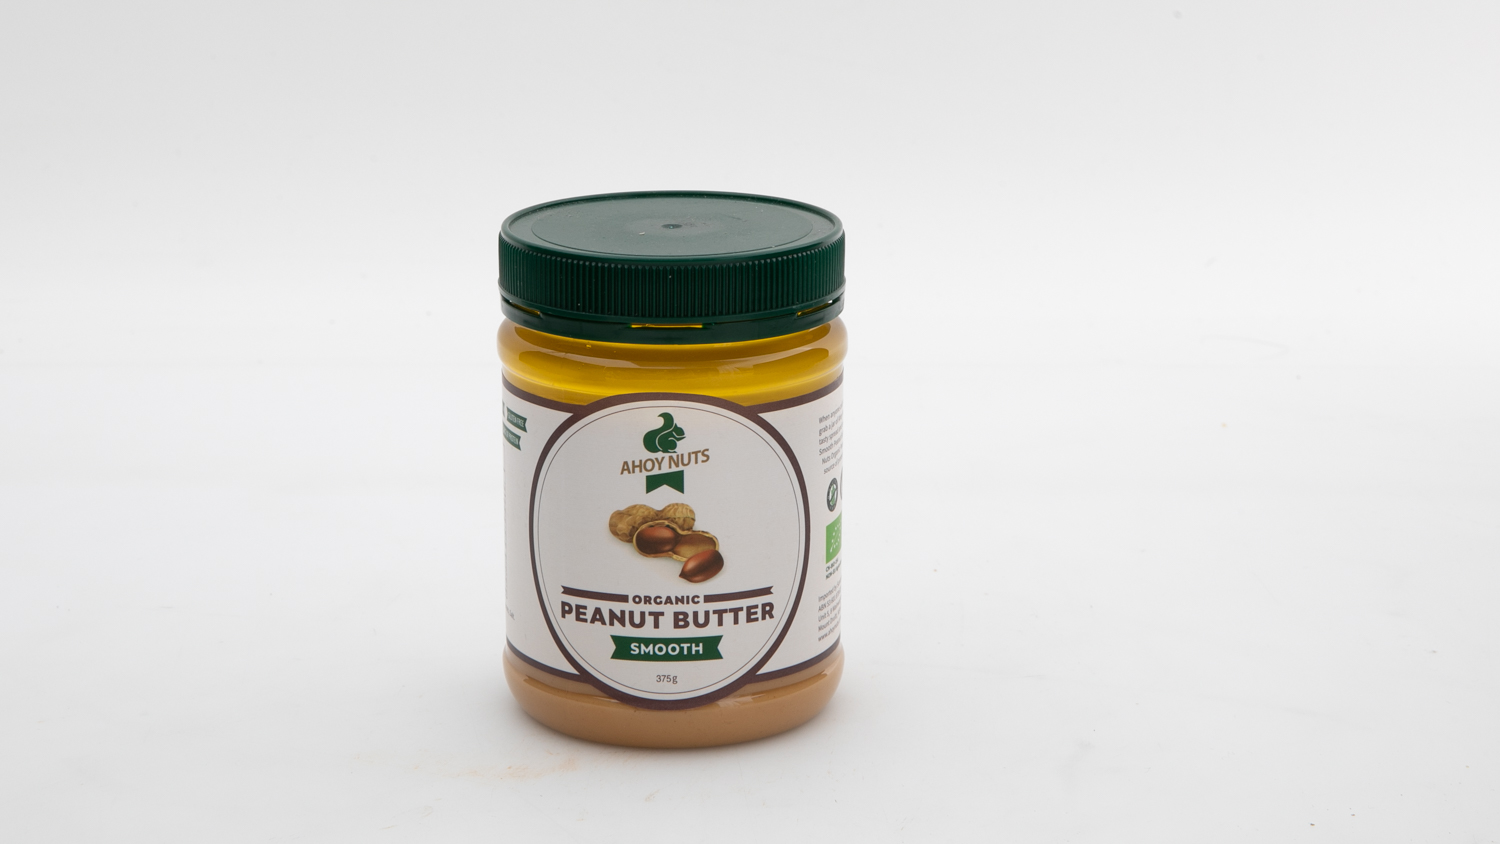 Ahoy Nuts Organic Peanut Butter Smooth carousel image